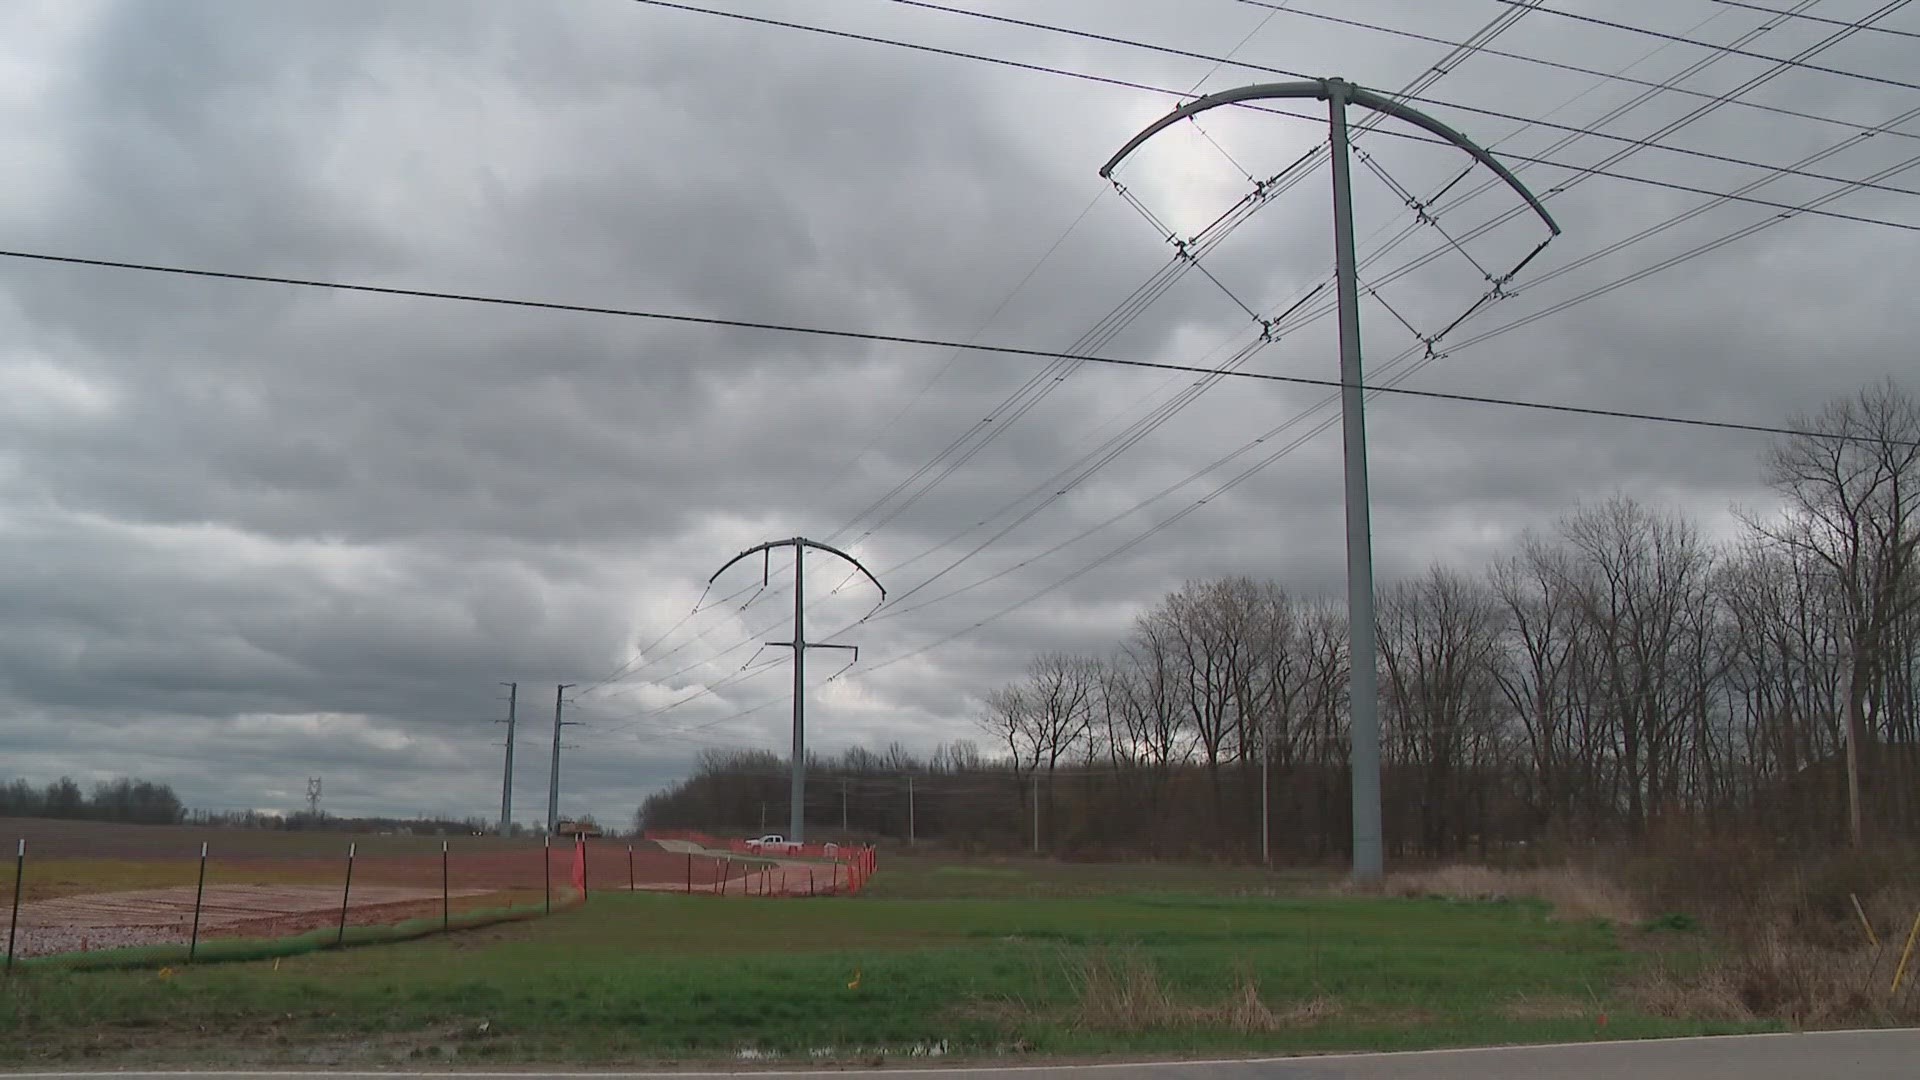 AEP says it plans to construct the first high-energy line in the fall with anticipated completion in the spring of 2026.